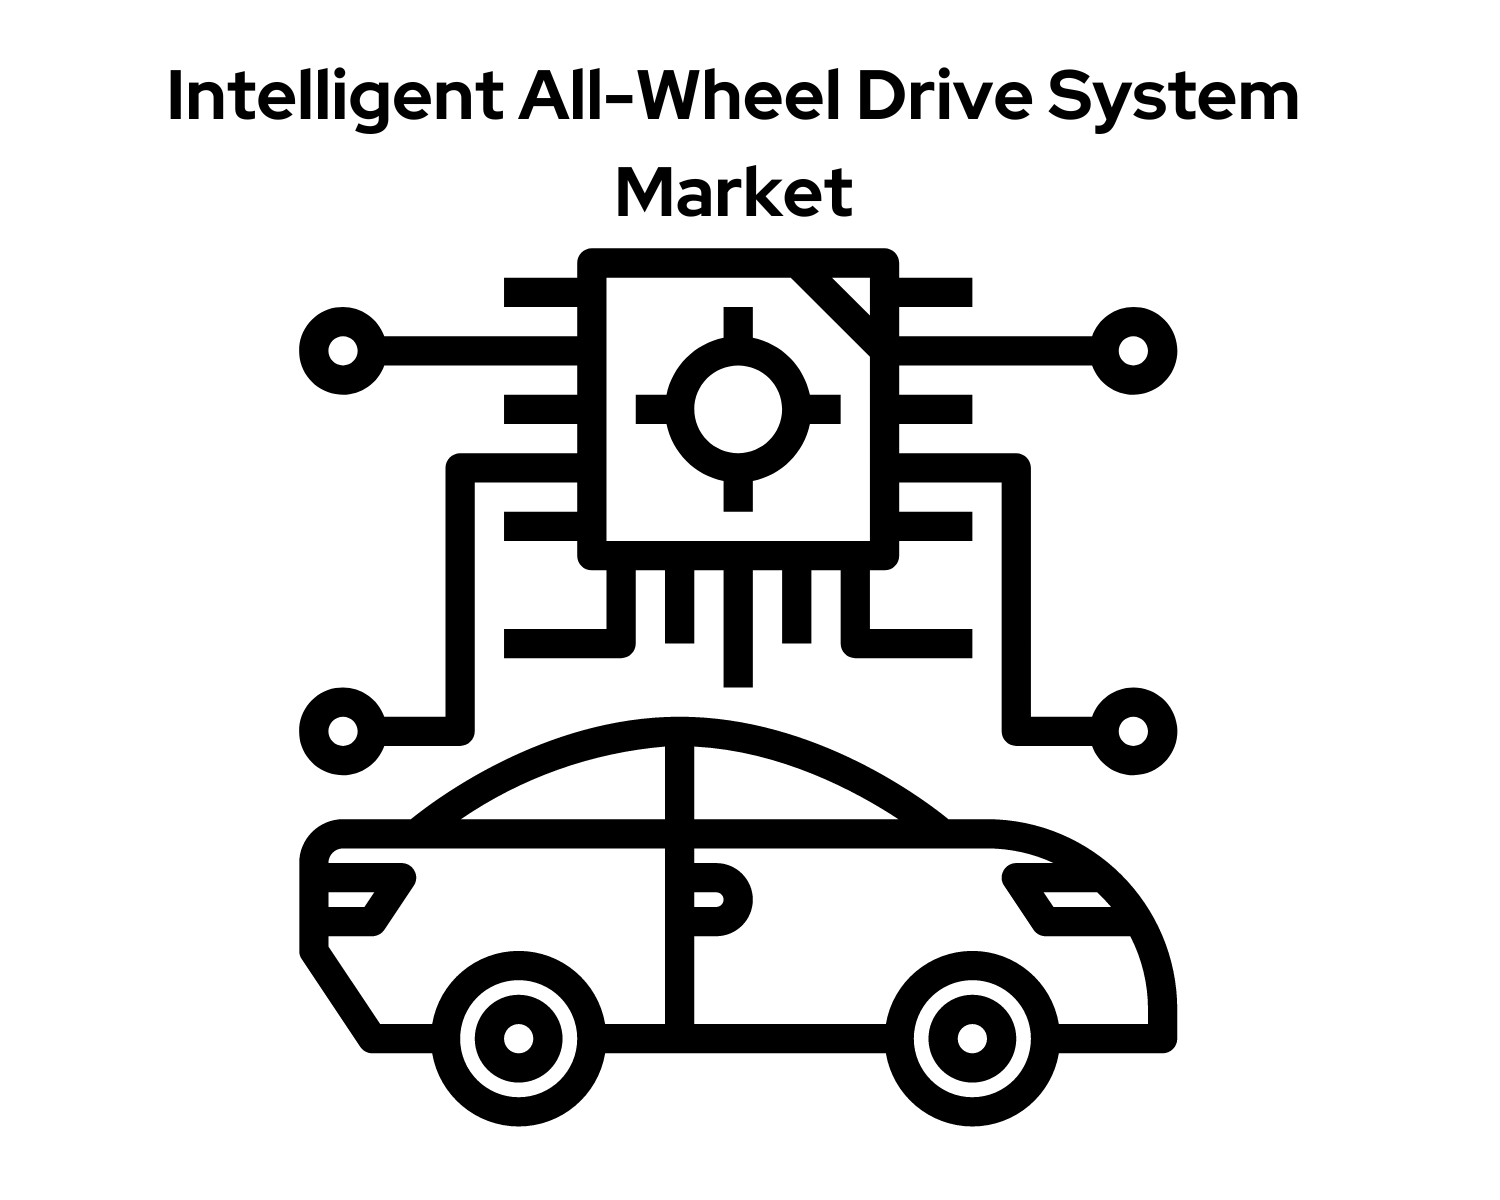 Intelligent All-Wheel Drive System Market Too Boost Industry by 7.8% During the Forecast Period From 2023 to 2032